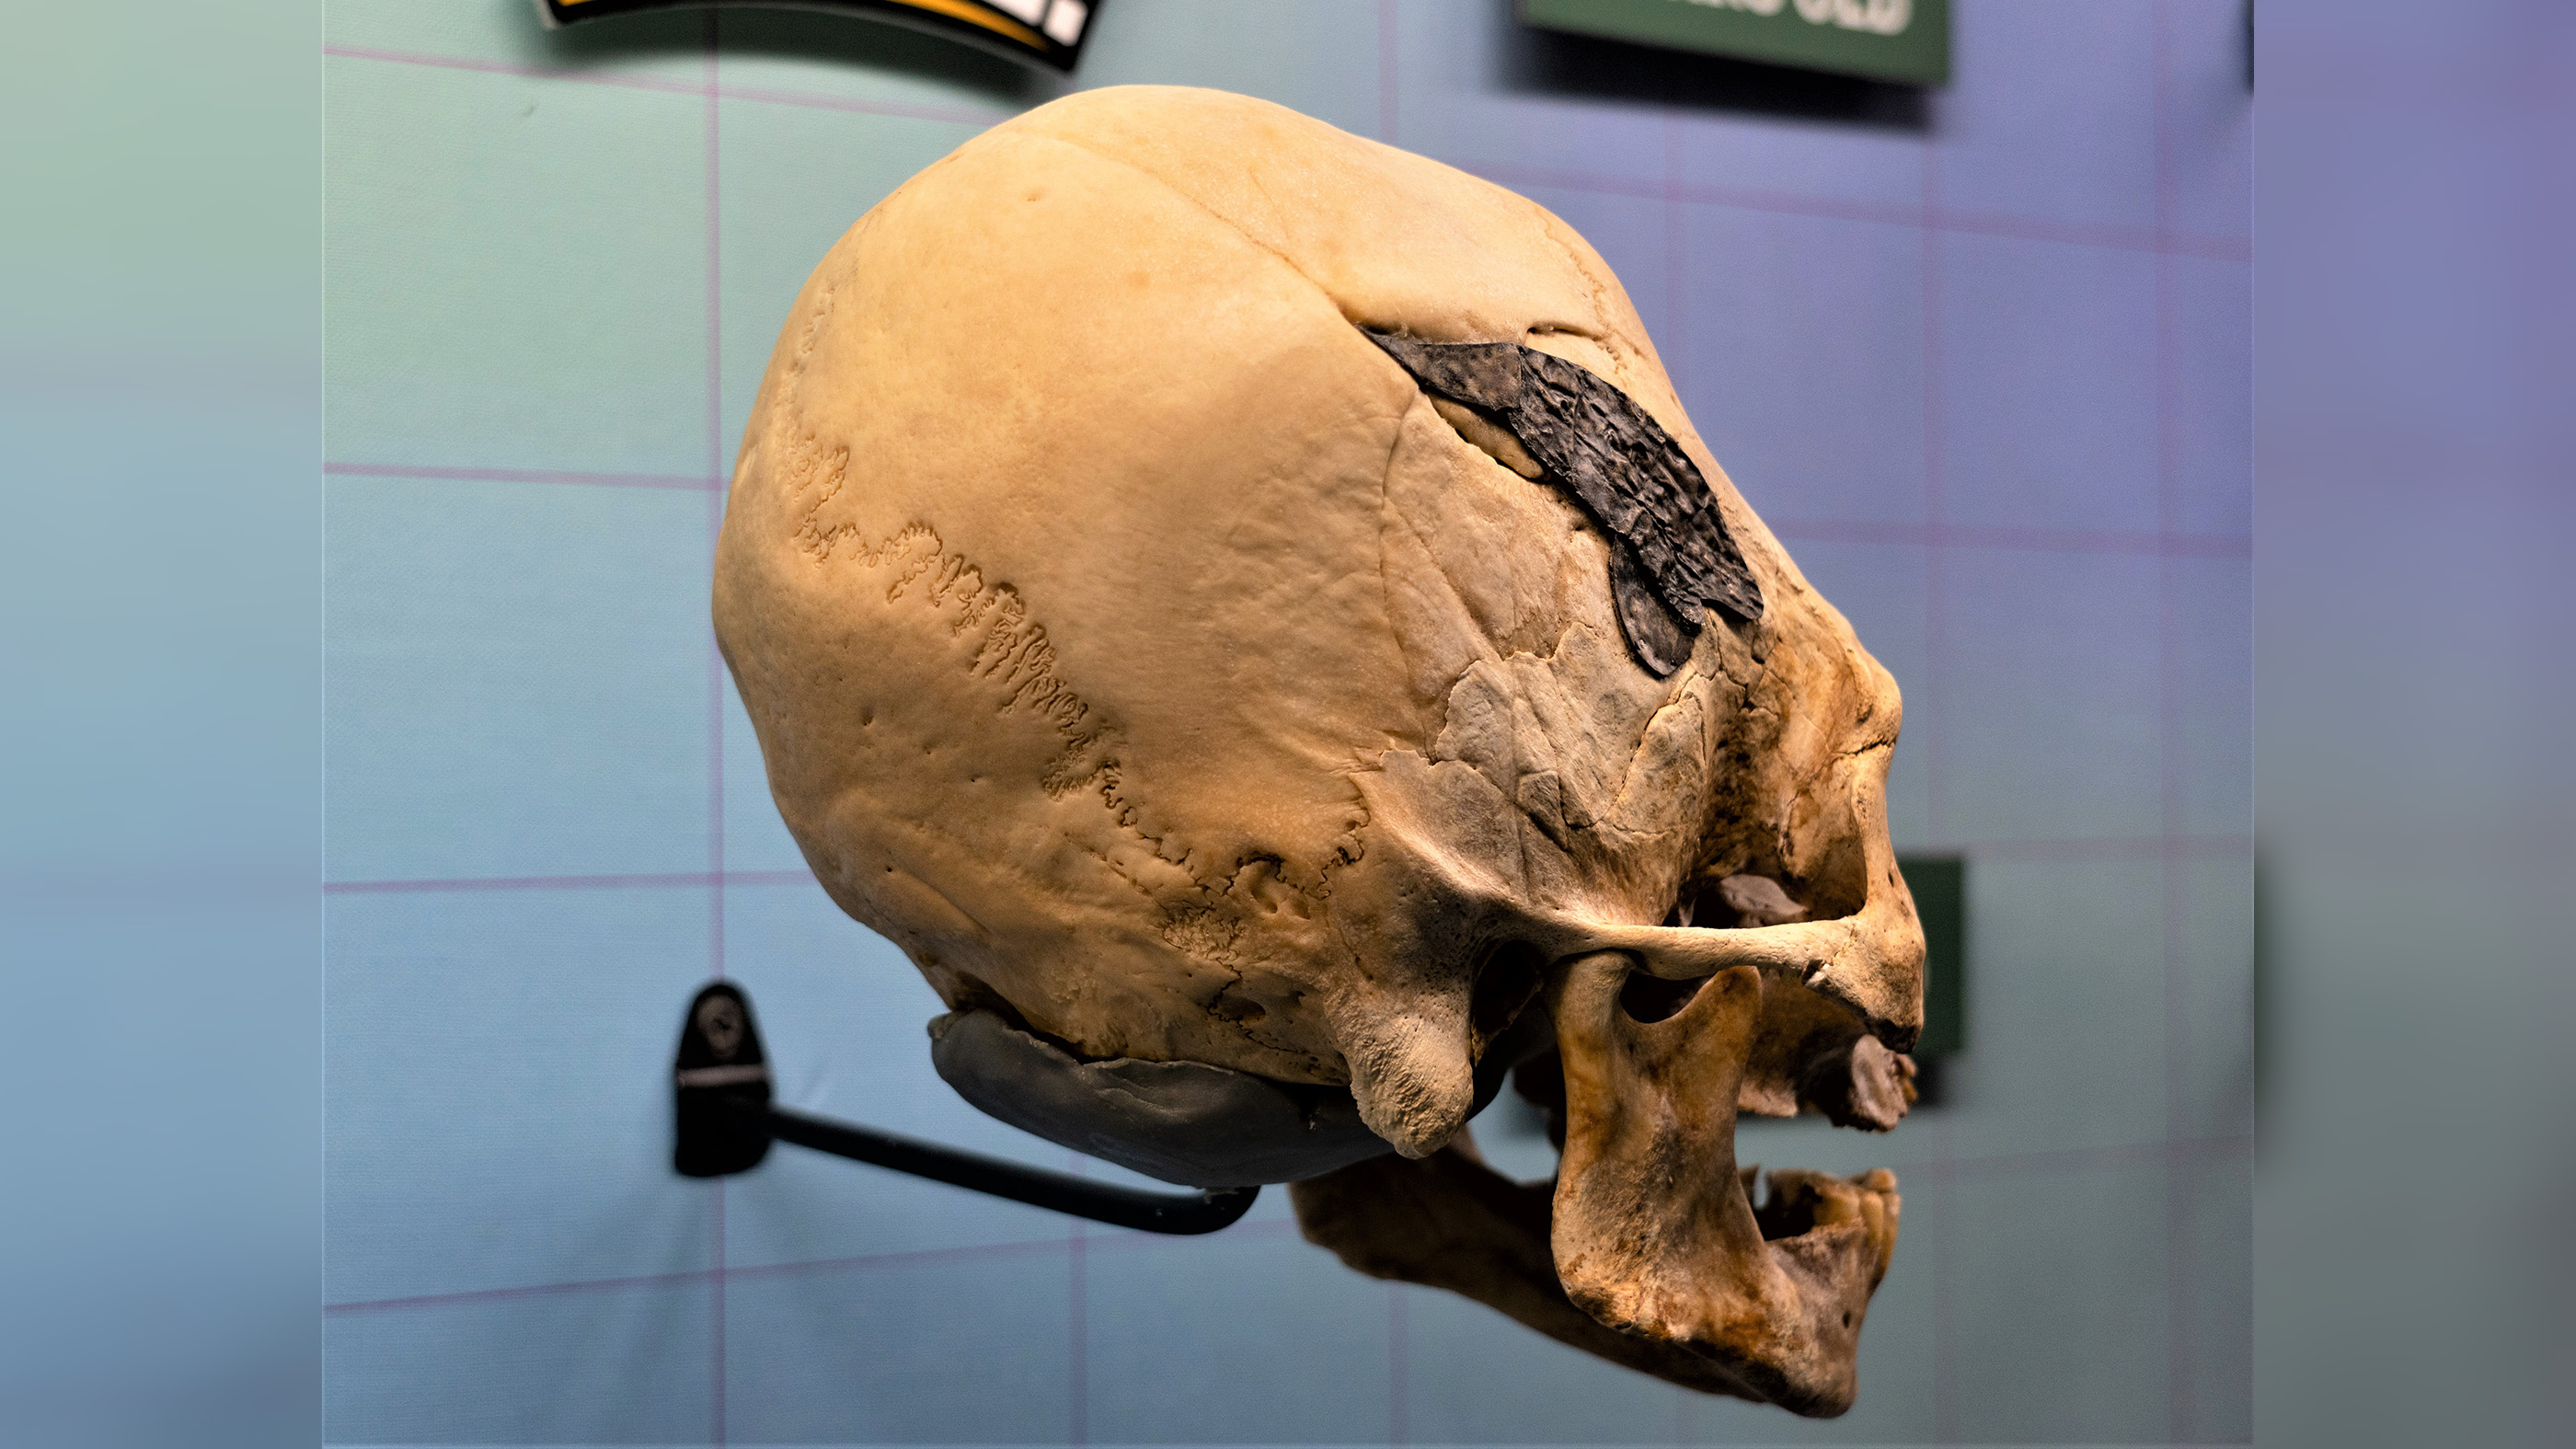 Ancient surgical implant or modern-day fake? Peru skull leaves mystery. thumbnail